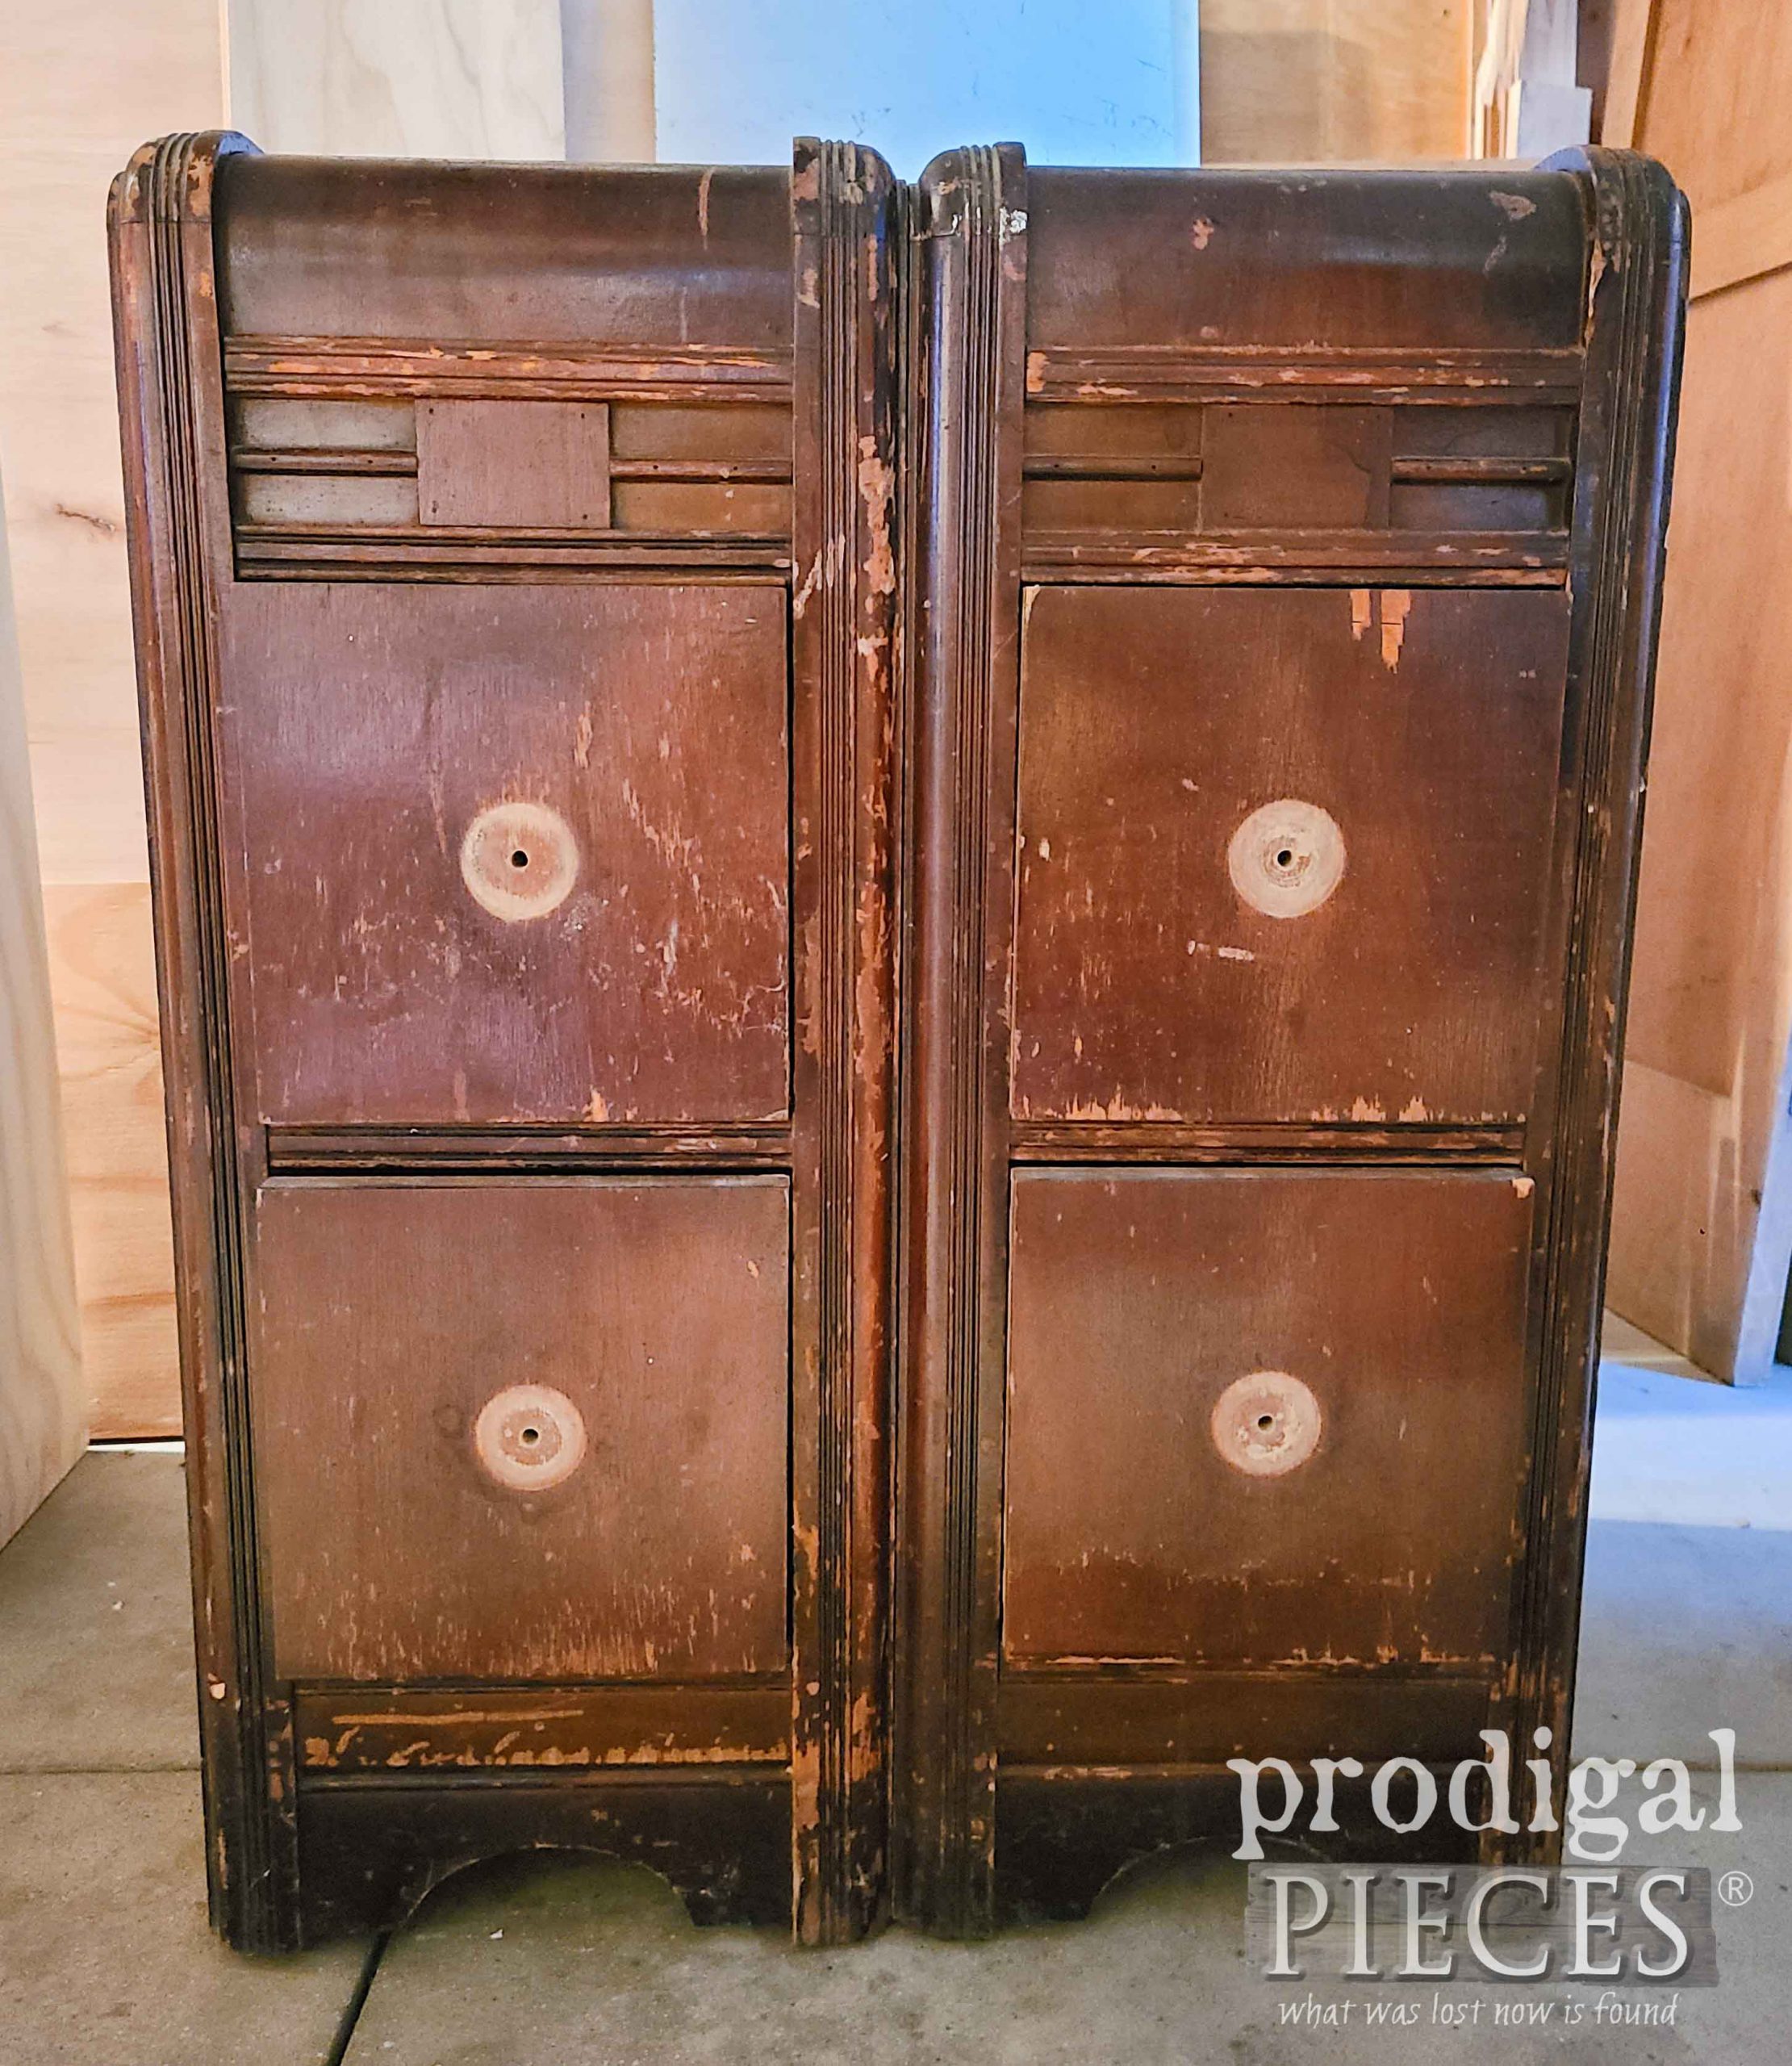 Repurposed Dressing Table Chest in Raw Form | prodigalpieces.com #prodigalpieces